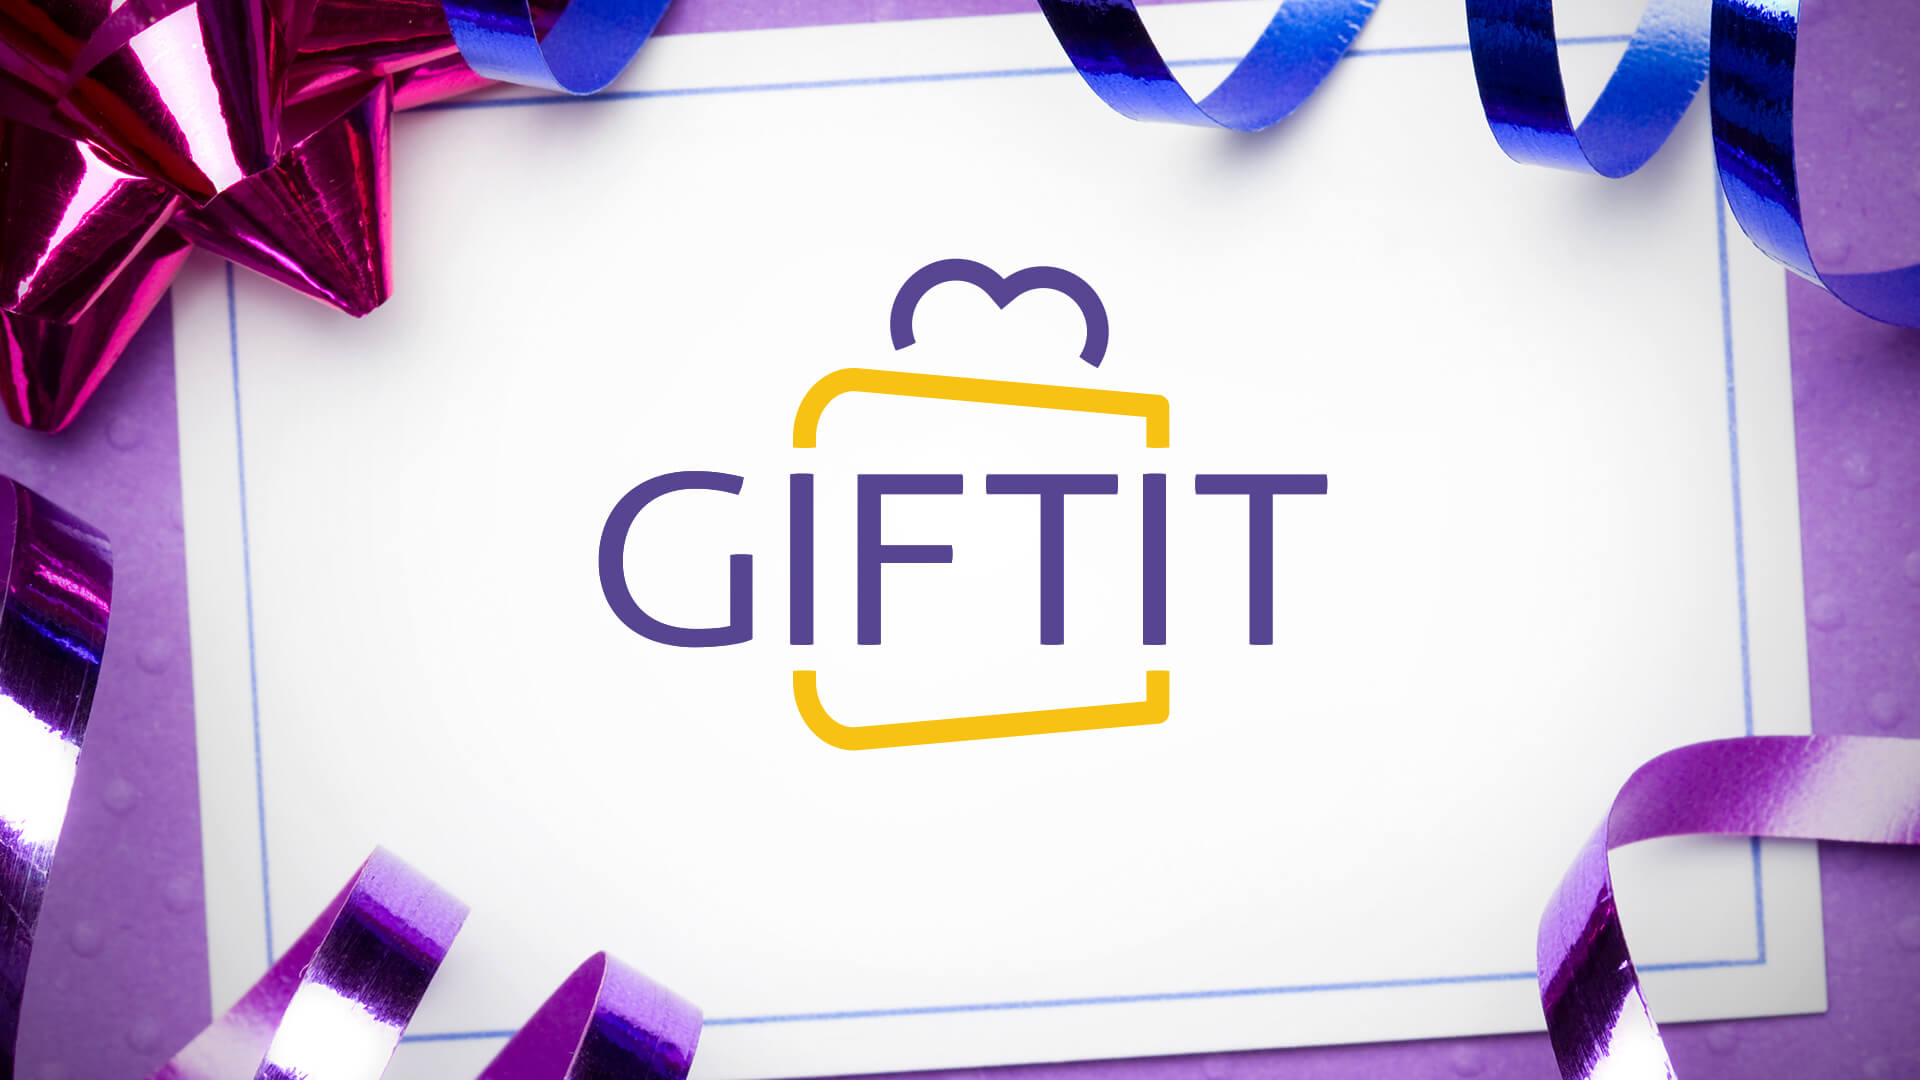 DNAMIC - Giftit App Development Case Study - Card like a party one